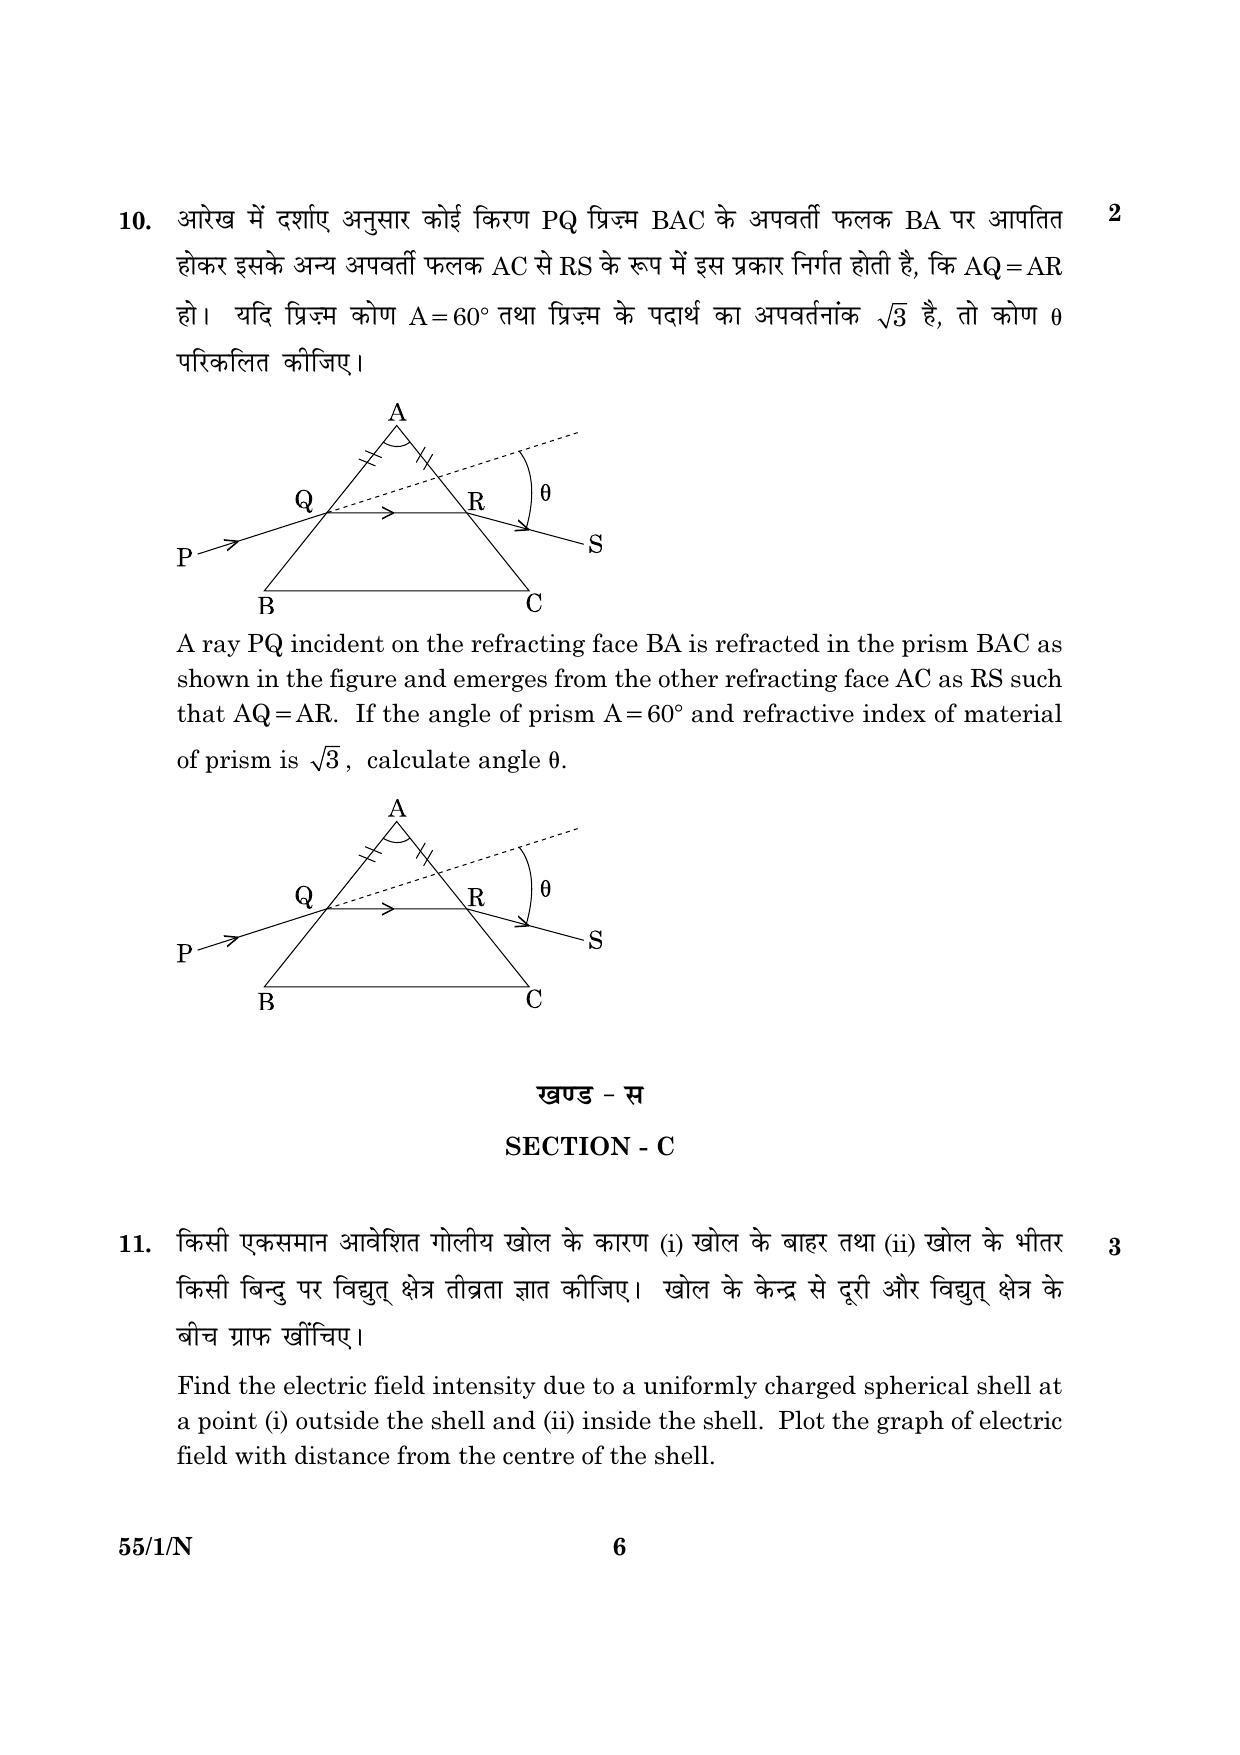 CBSE Class 12 055 Set 1 N Physics Theory 2016 Question Paper - Page 6